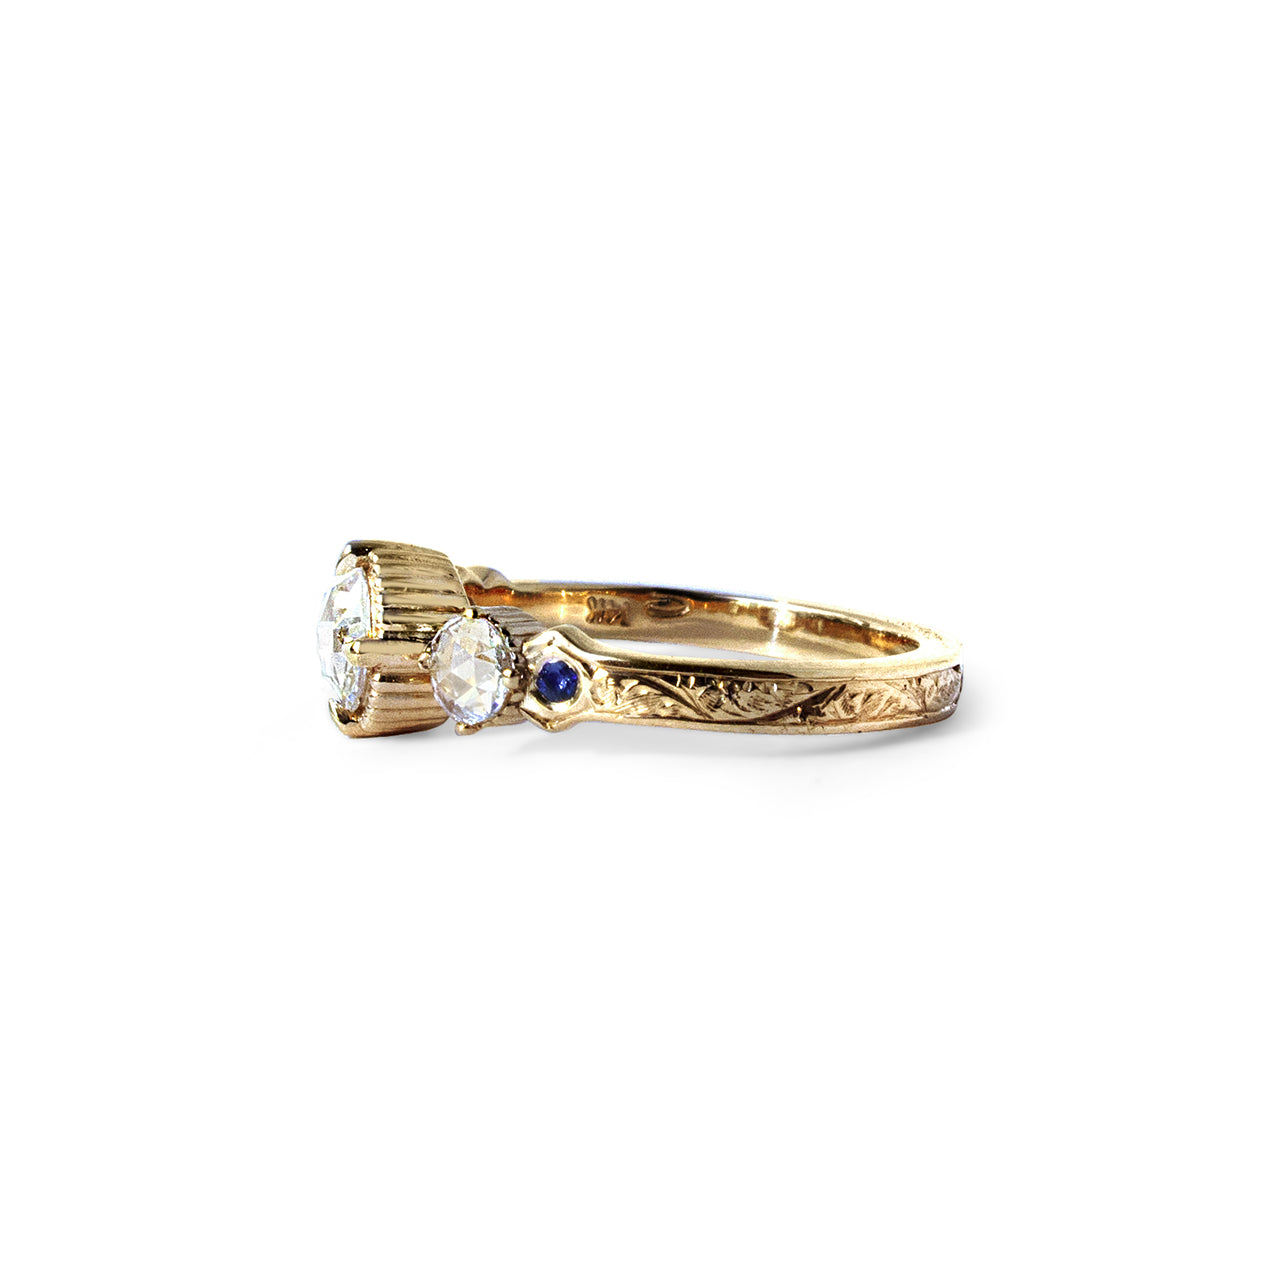 Crafted in 14KT yellow gold, this ring features a large rose-cut diamond with a smaller diamond and a blue sapphire on each side. All on a vintage-inspired hand engraved band.